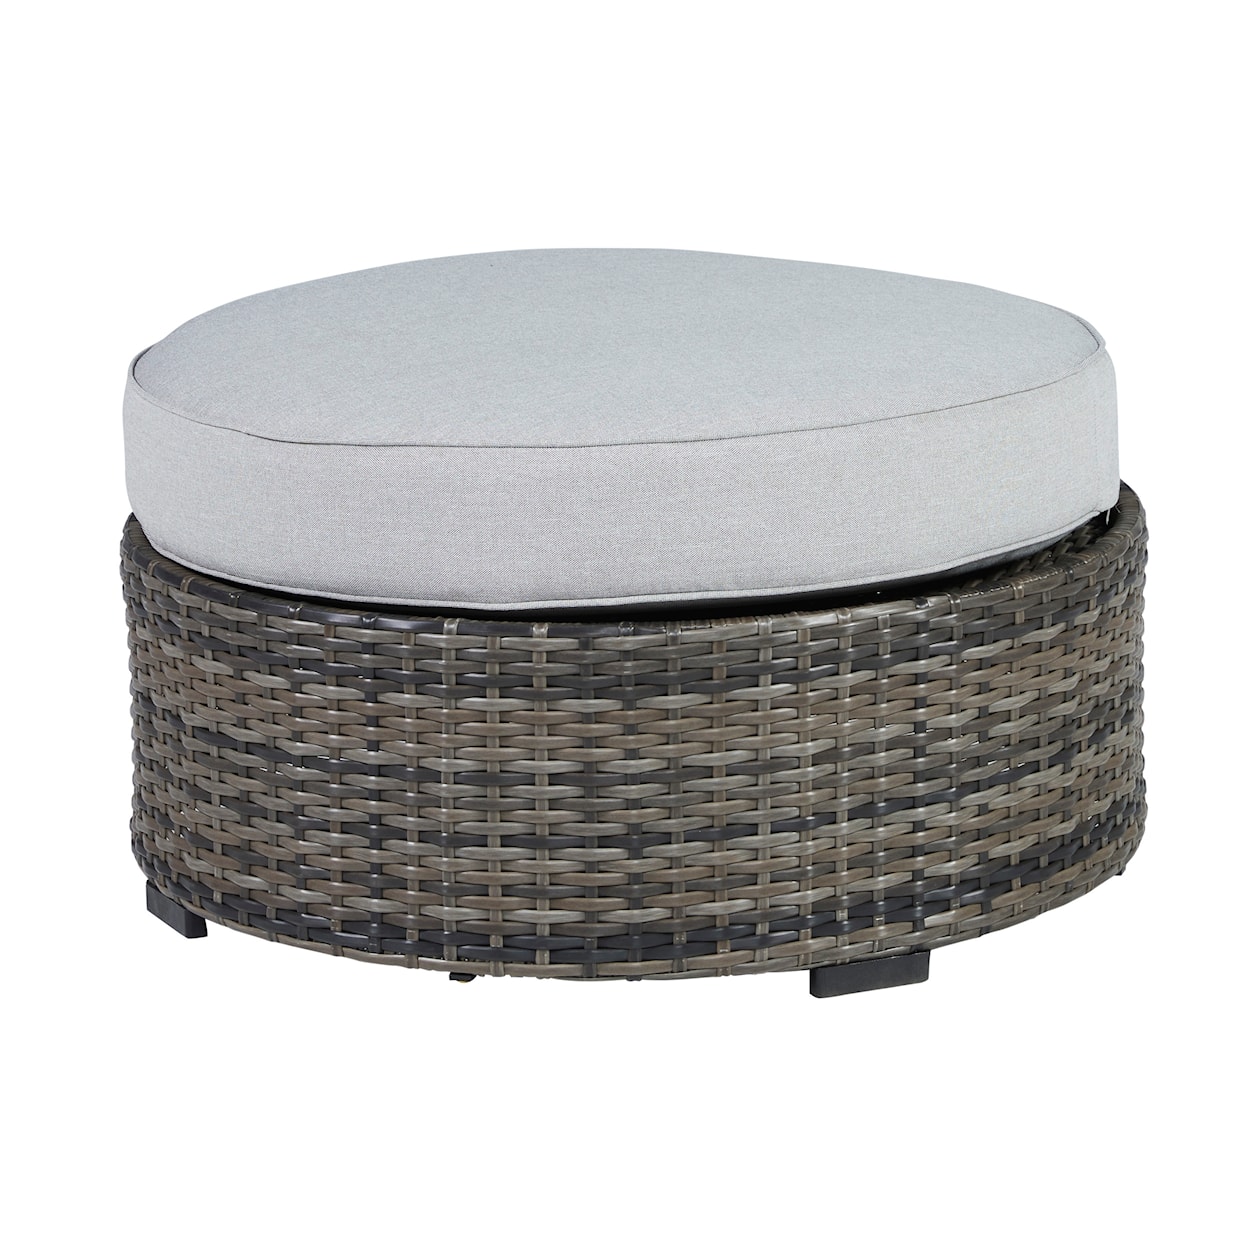 Signature Design by Ashley Harbor Court Ottoman with Cushion